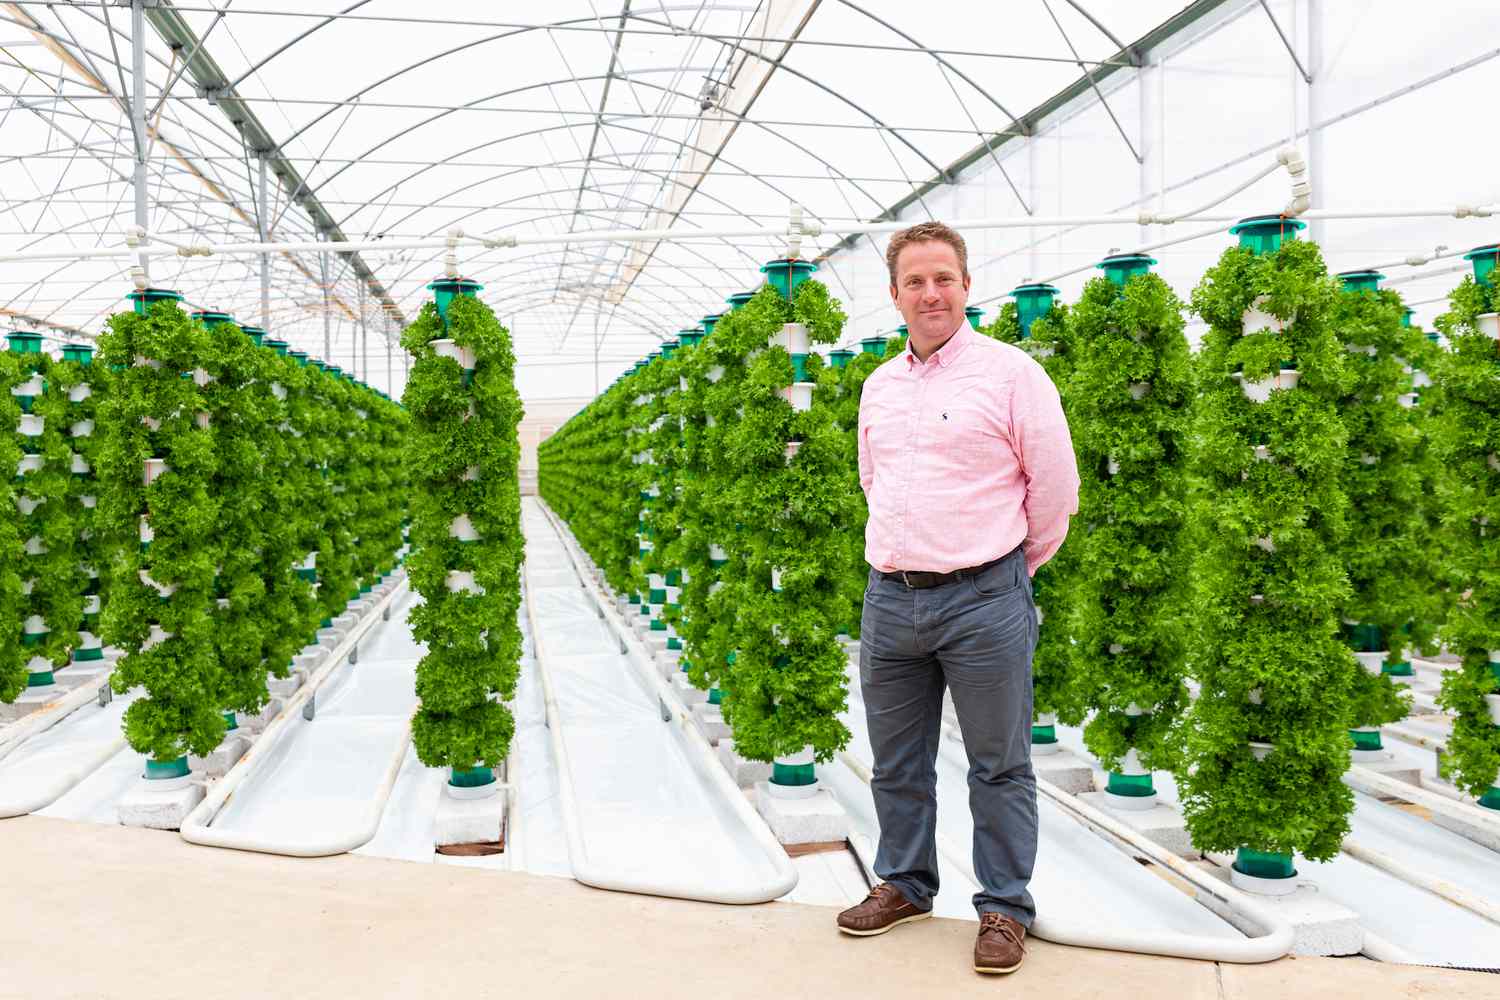 Hippo Harvest Secures $21M Funding To Revolutionize Lettuce Farming With Robotics And AI